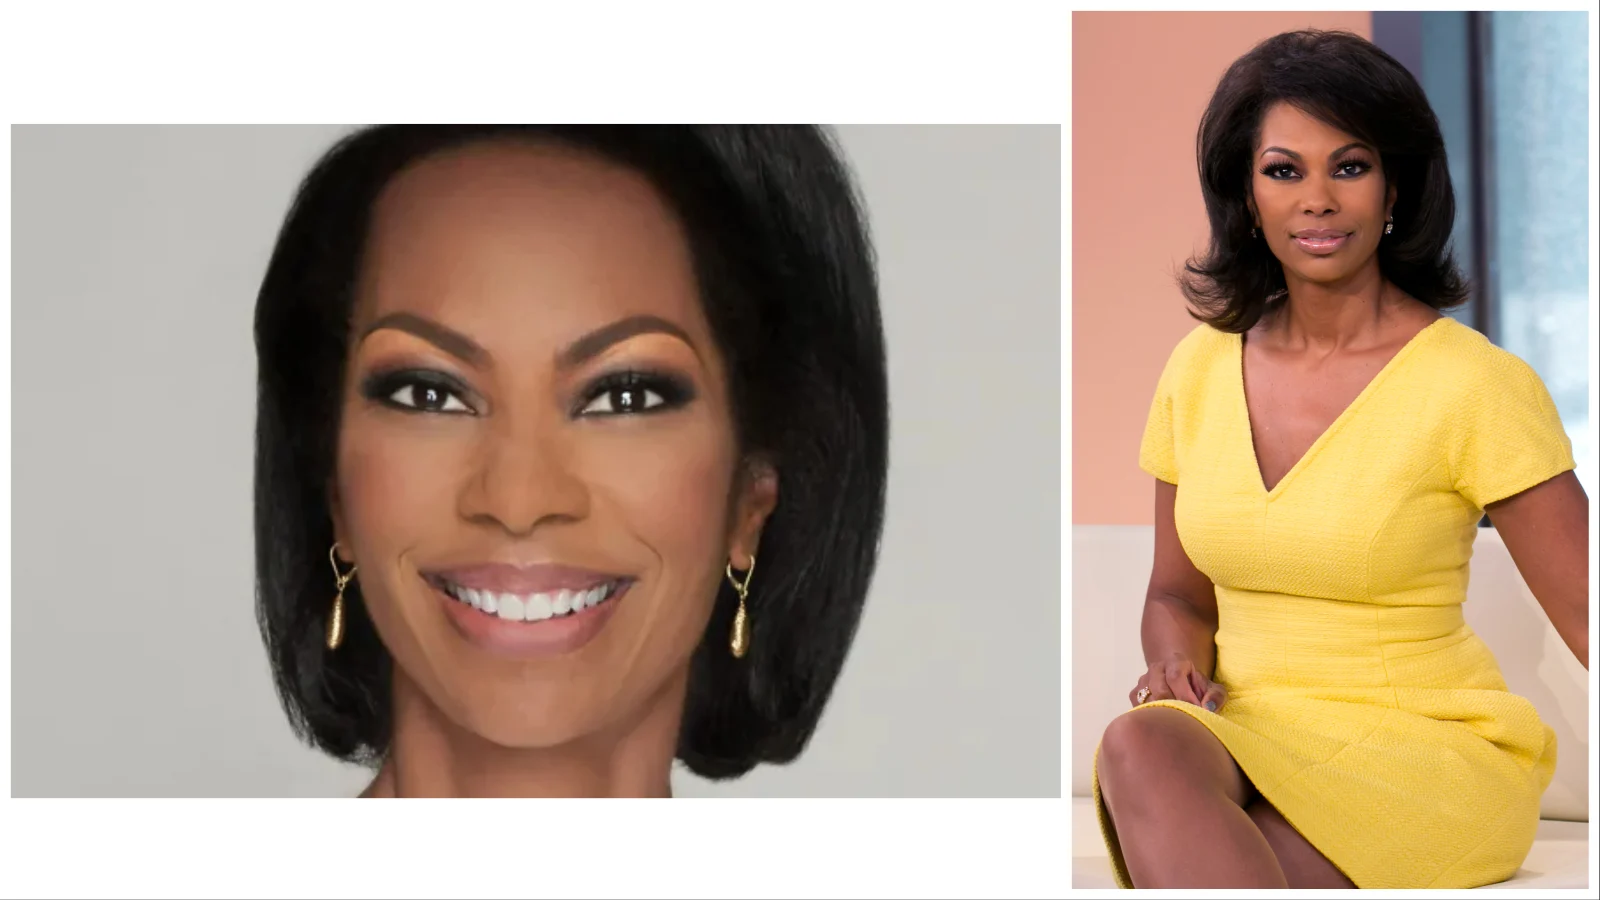 Harris Faulkner Net Worth 2023, Annual Income, Age, Height, Family, House, Cars etc.